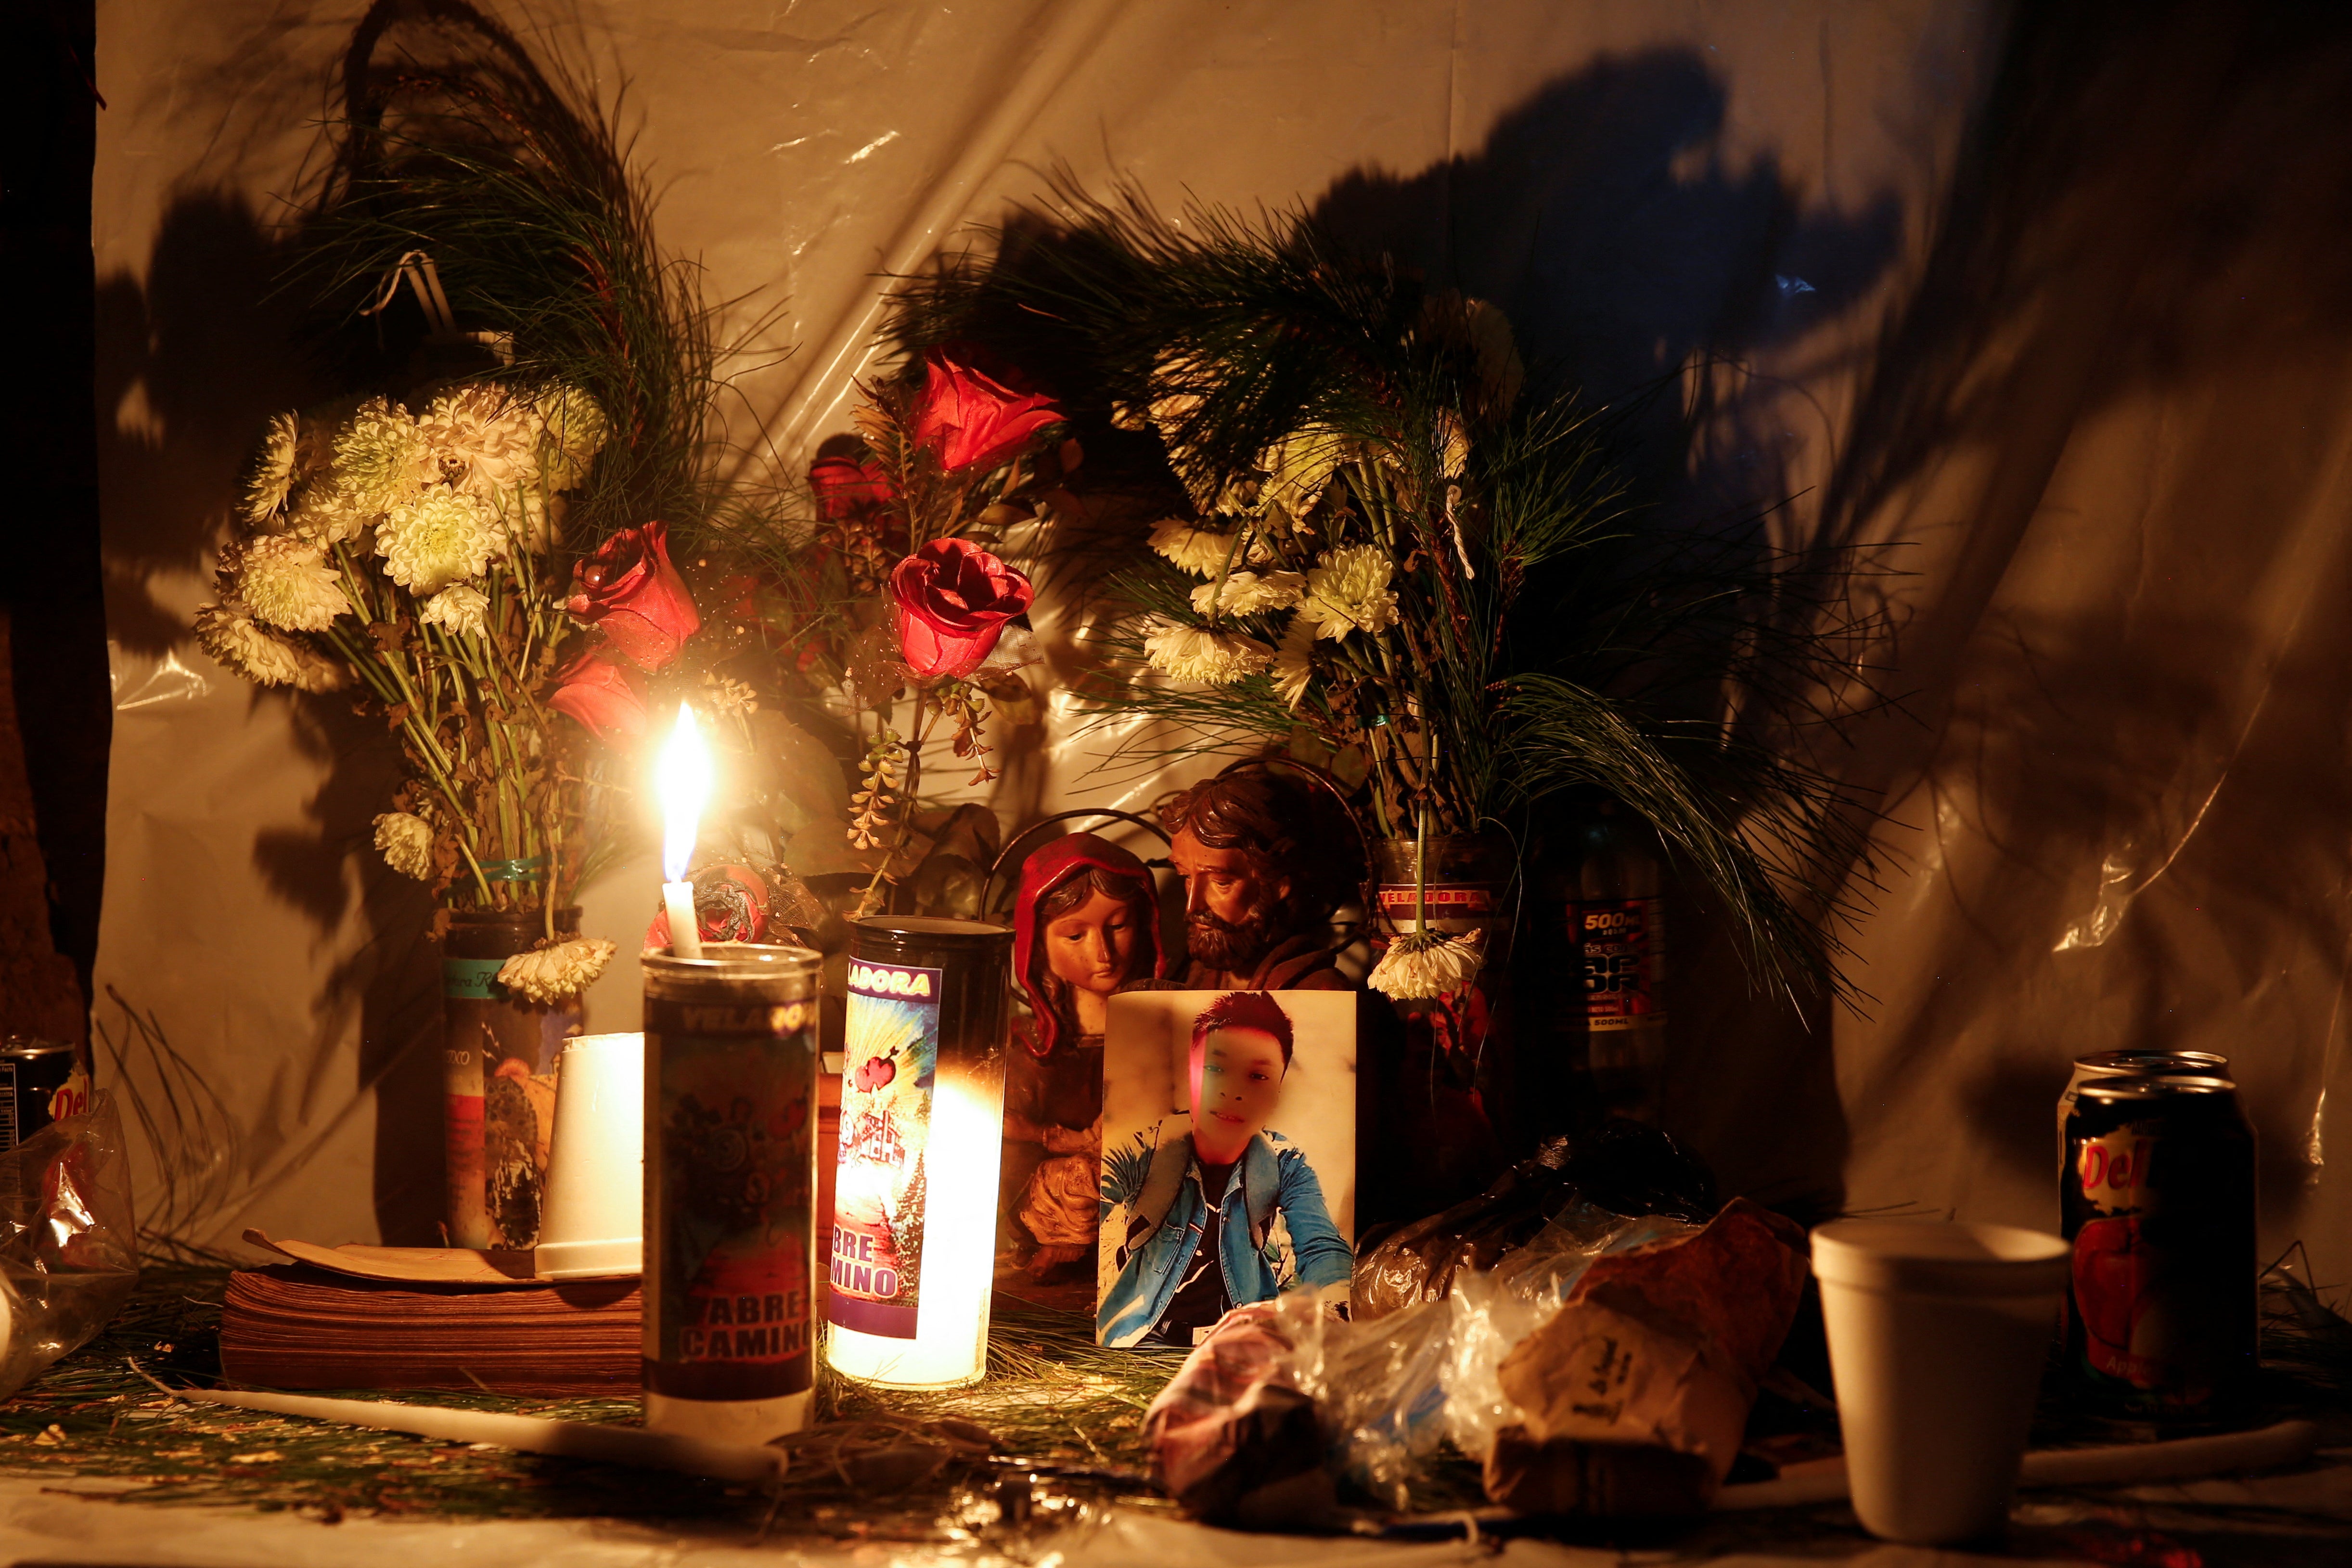 An altar in memory of Domingo Raymundo Mateo who died in the crash in Mexico is pictured in Chajul, Guatemala